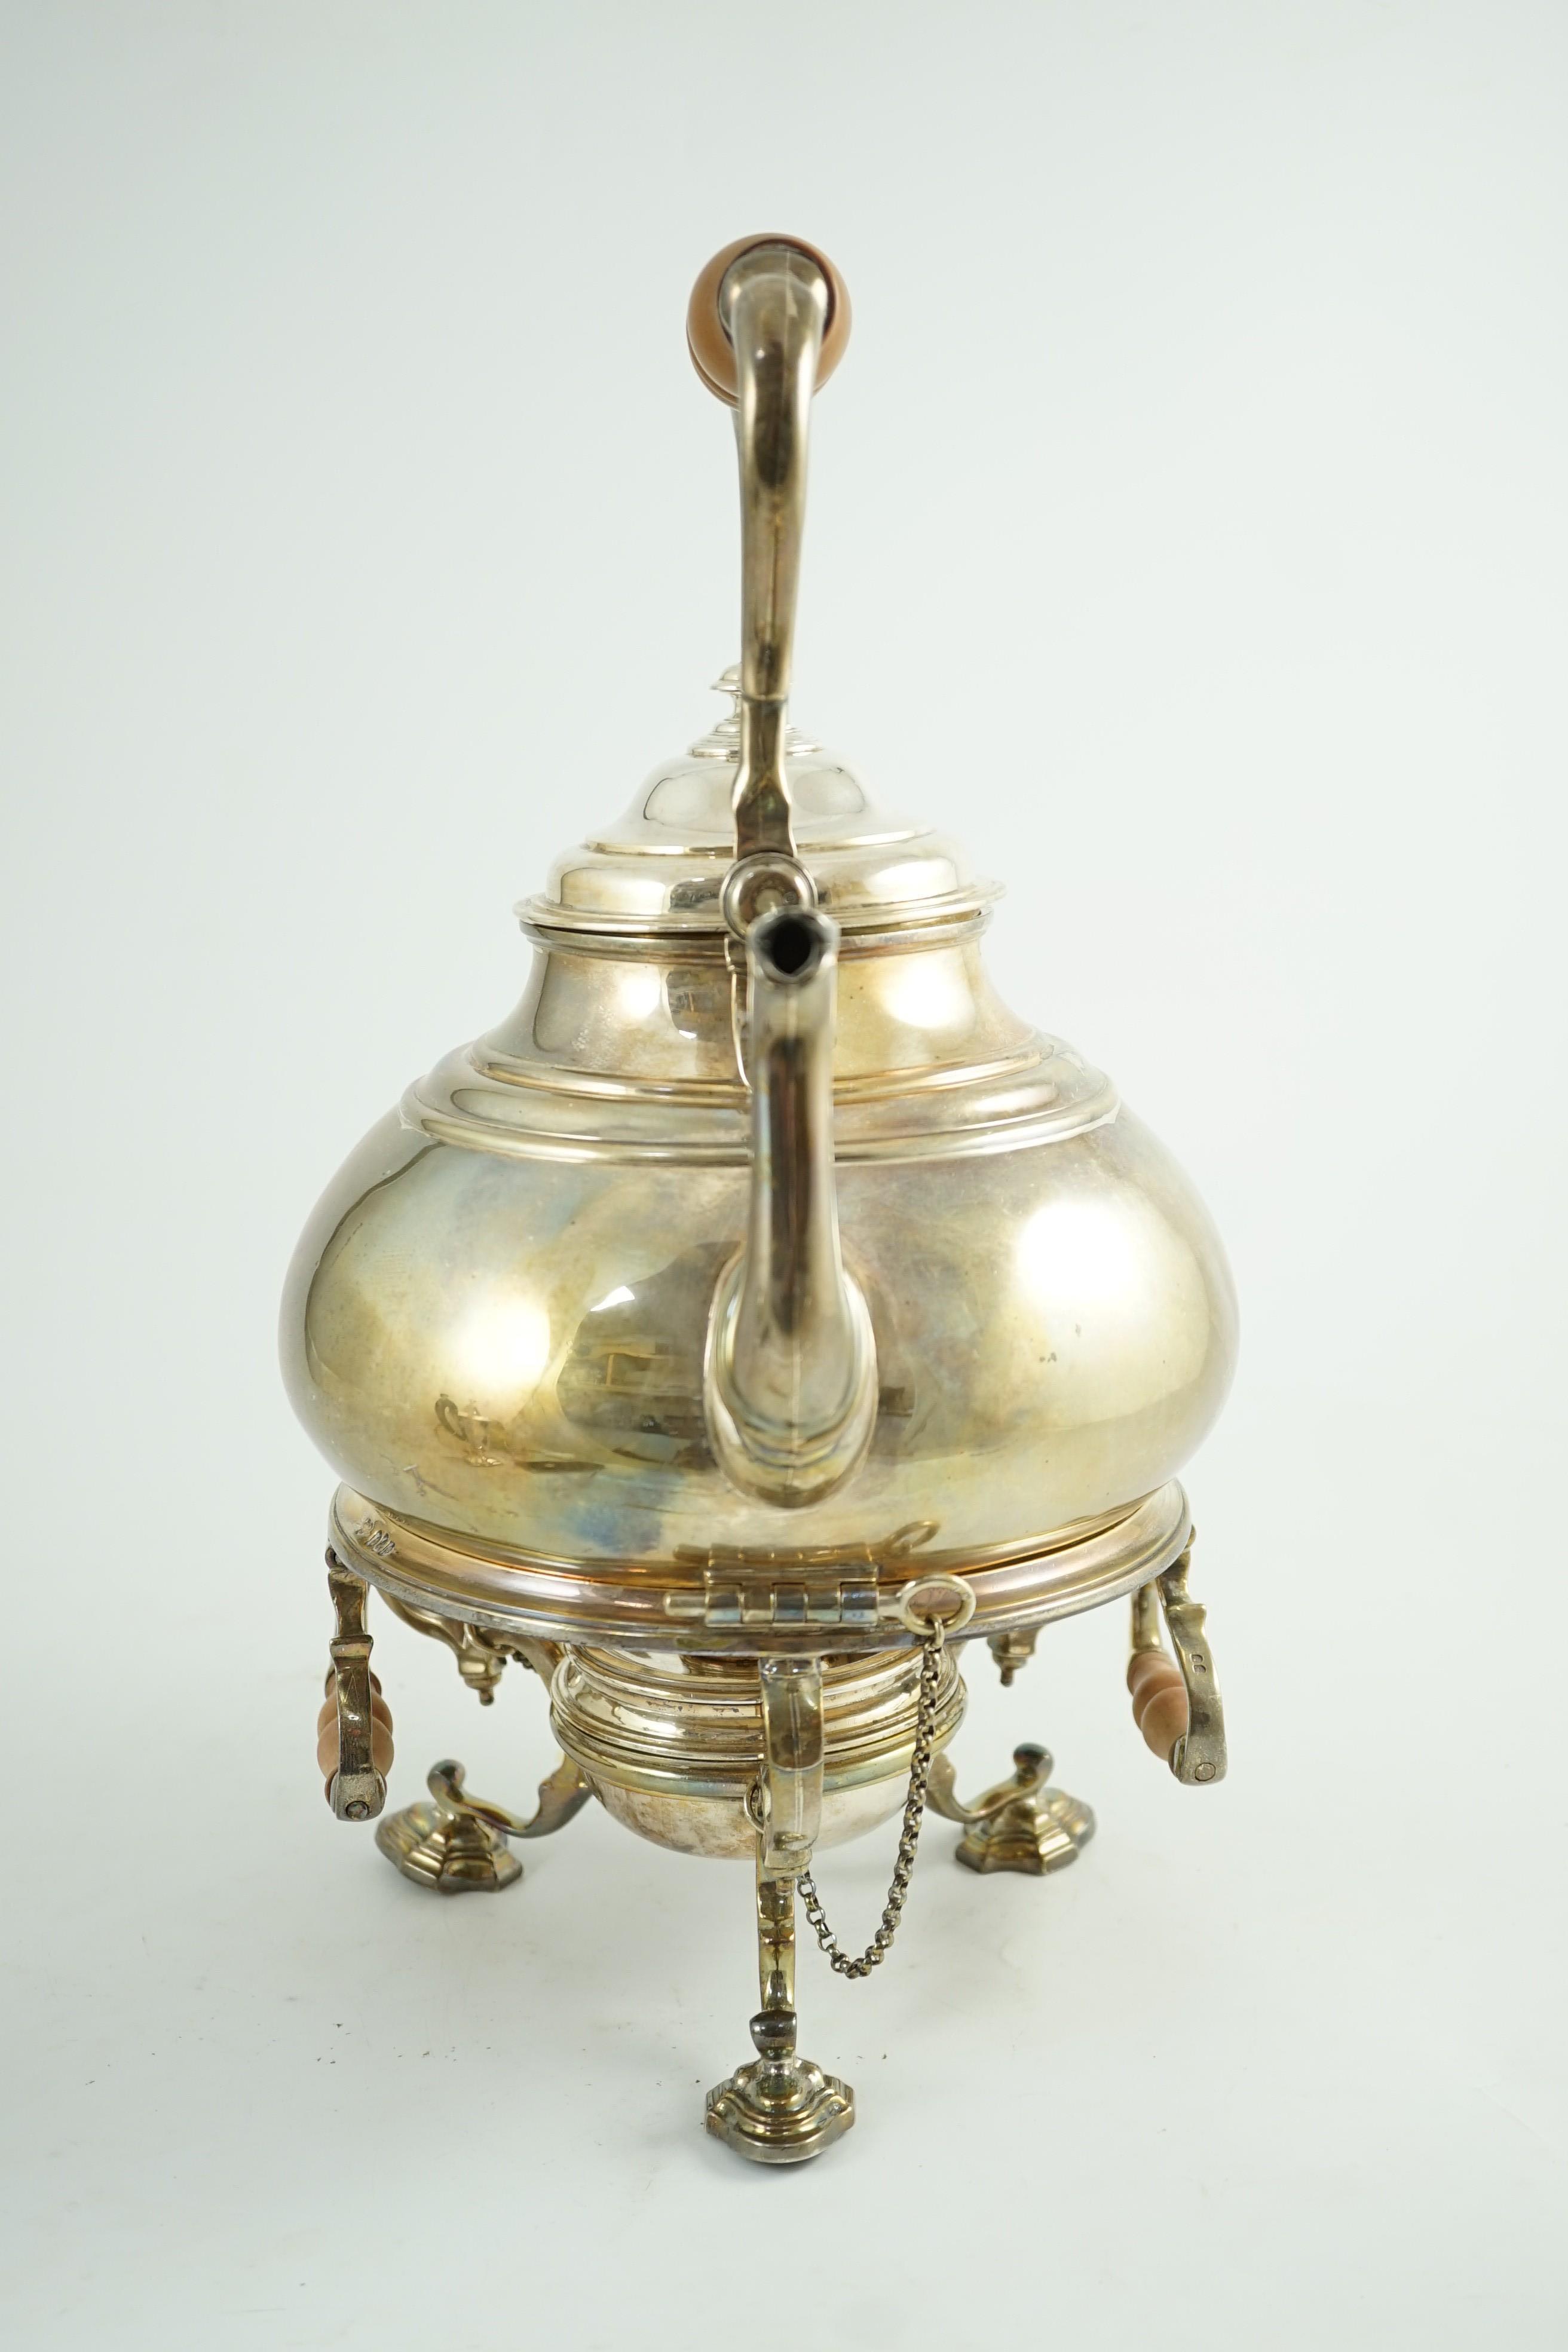 A large George V Britannia standard silver tea kettle on two handled stand, with burner, by - Image 3 of 6